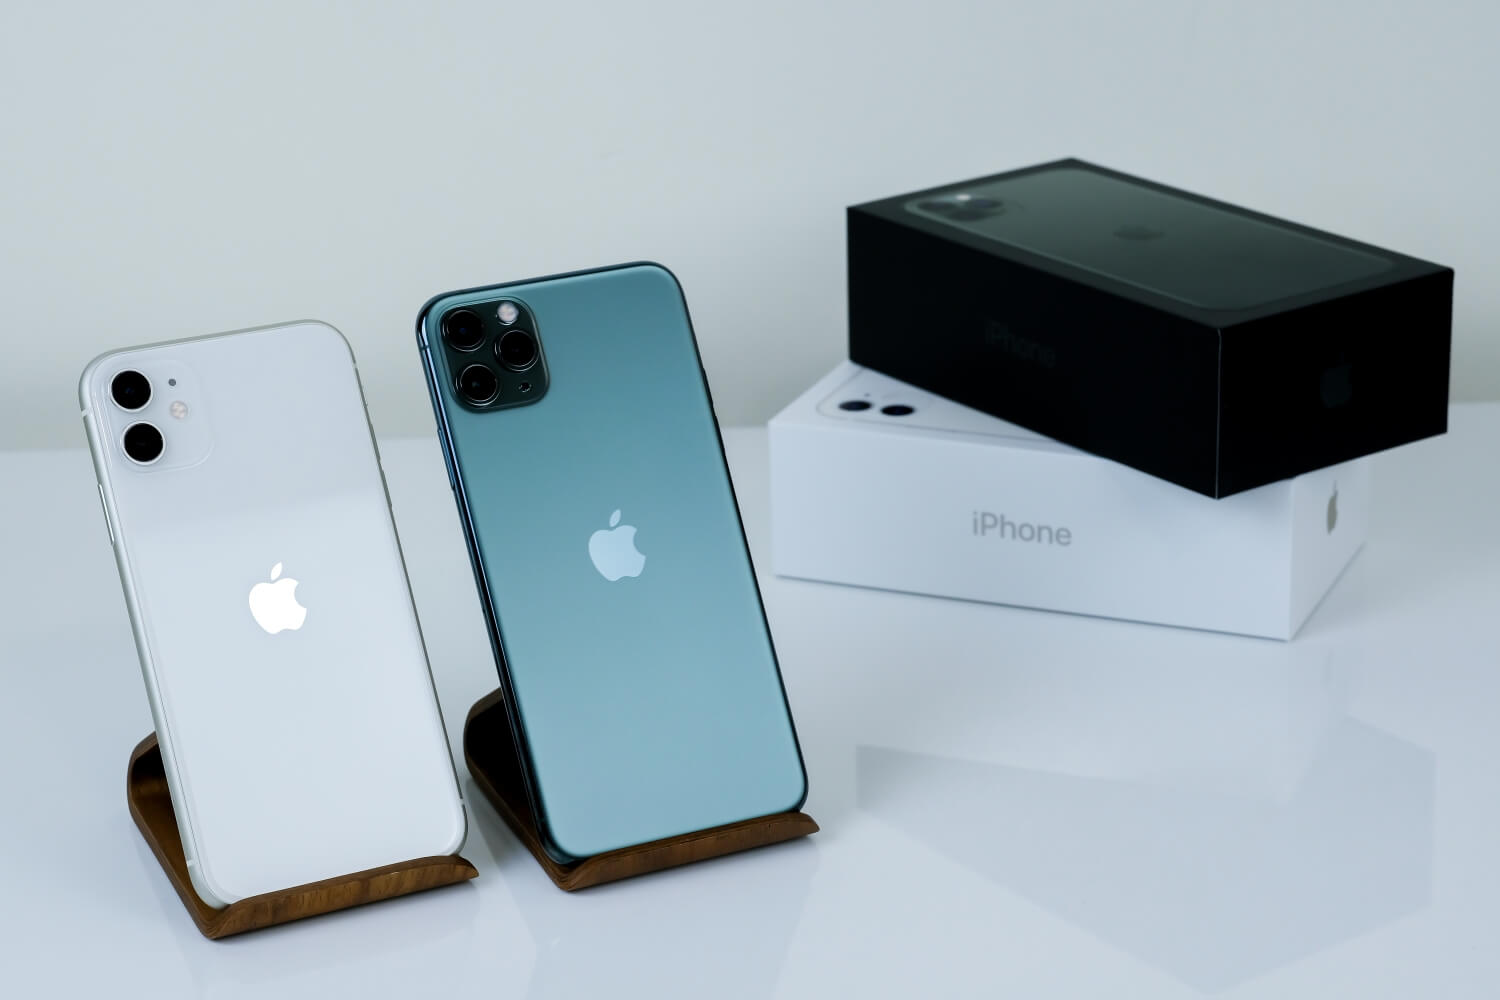 Apple may discontinue iPhone XR and iPhone 11 Pro after the iPhone 12 launch